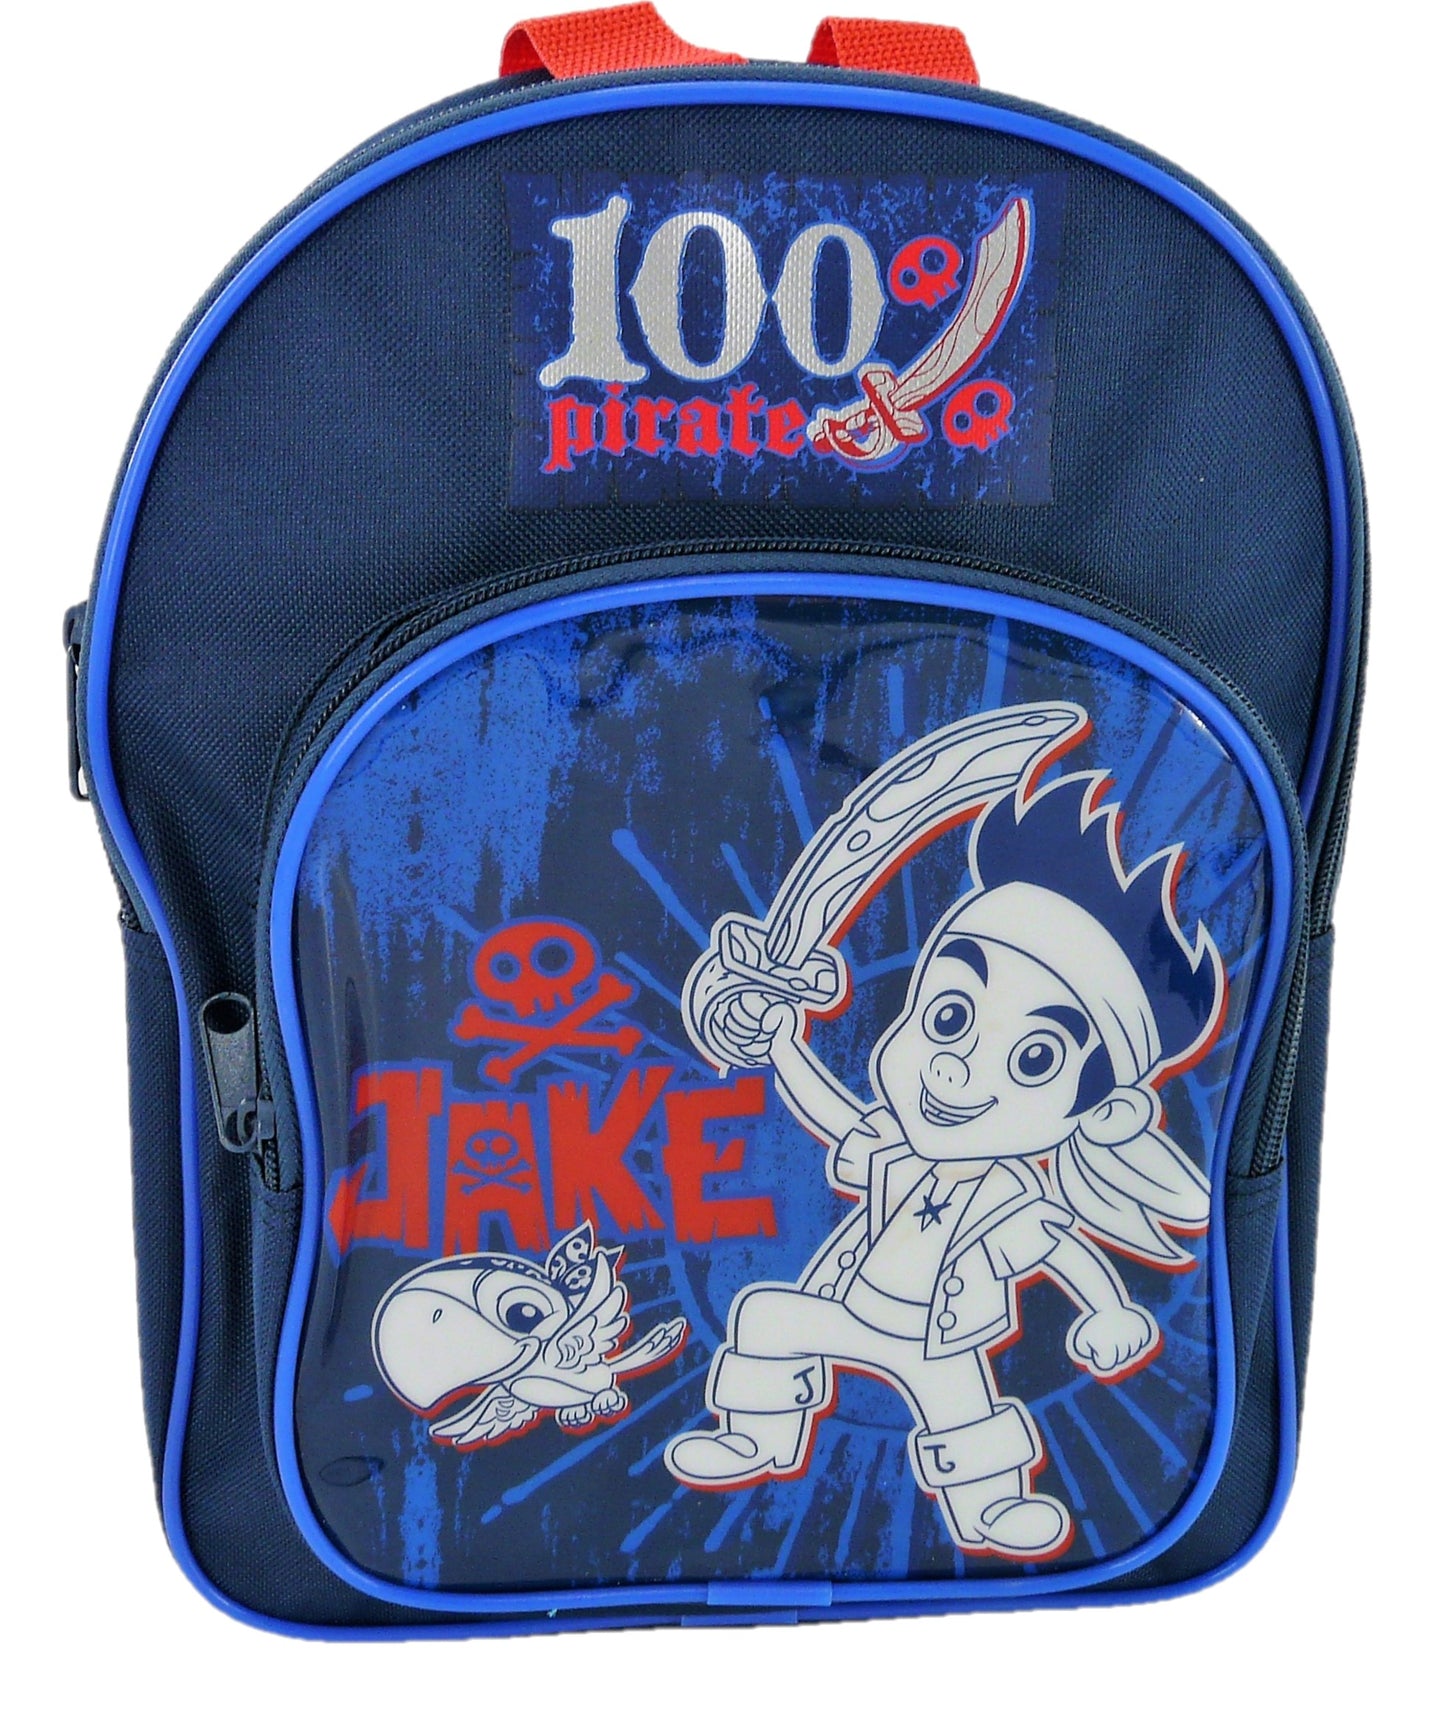 Jake and the Neverland Pirates Children's Backpack